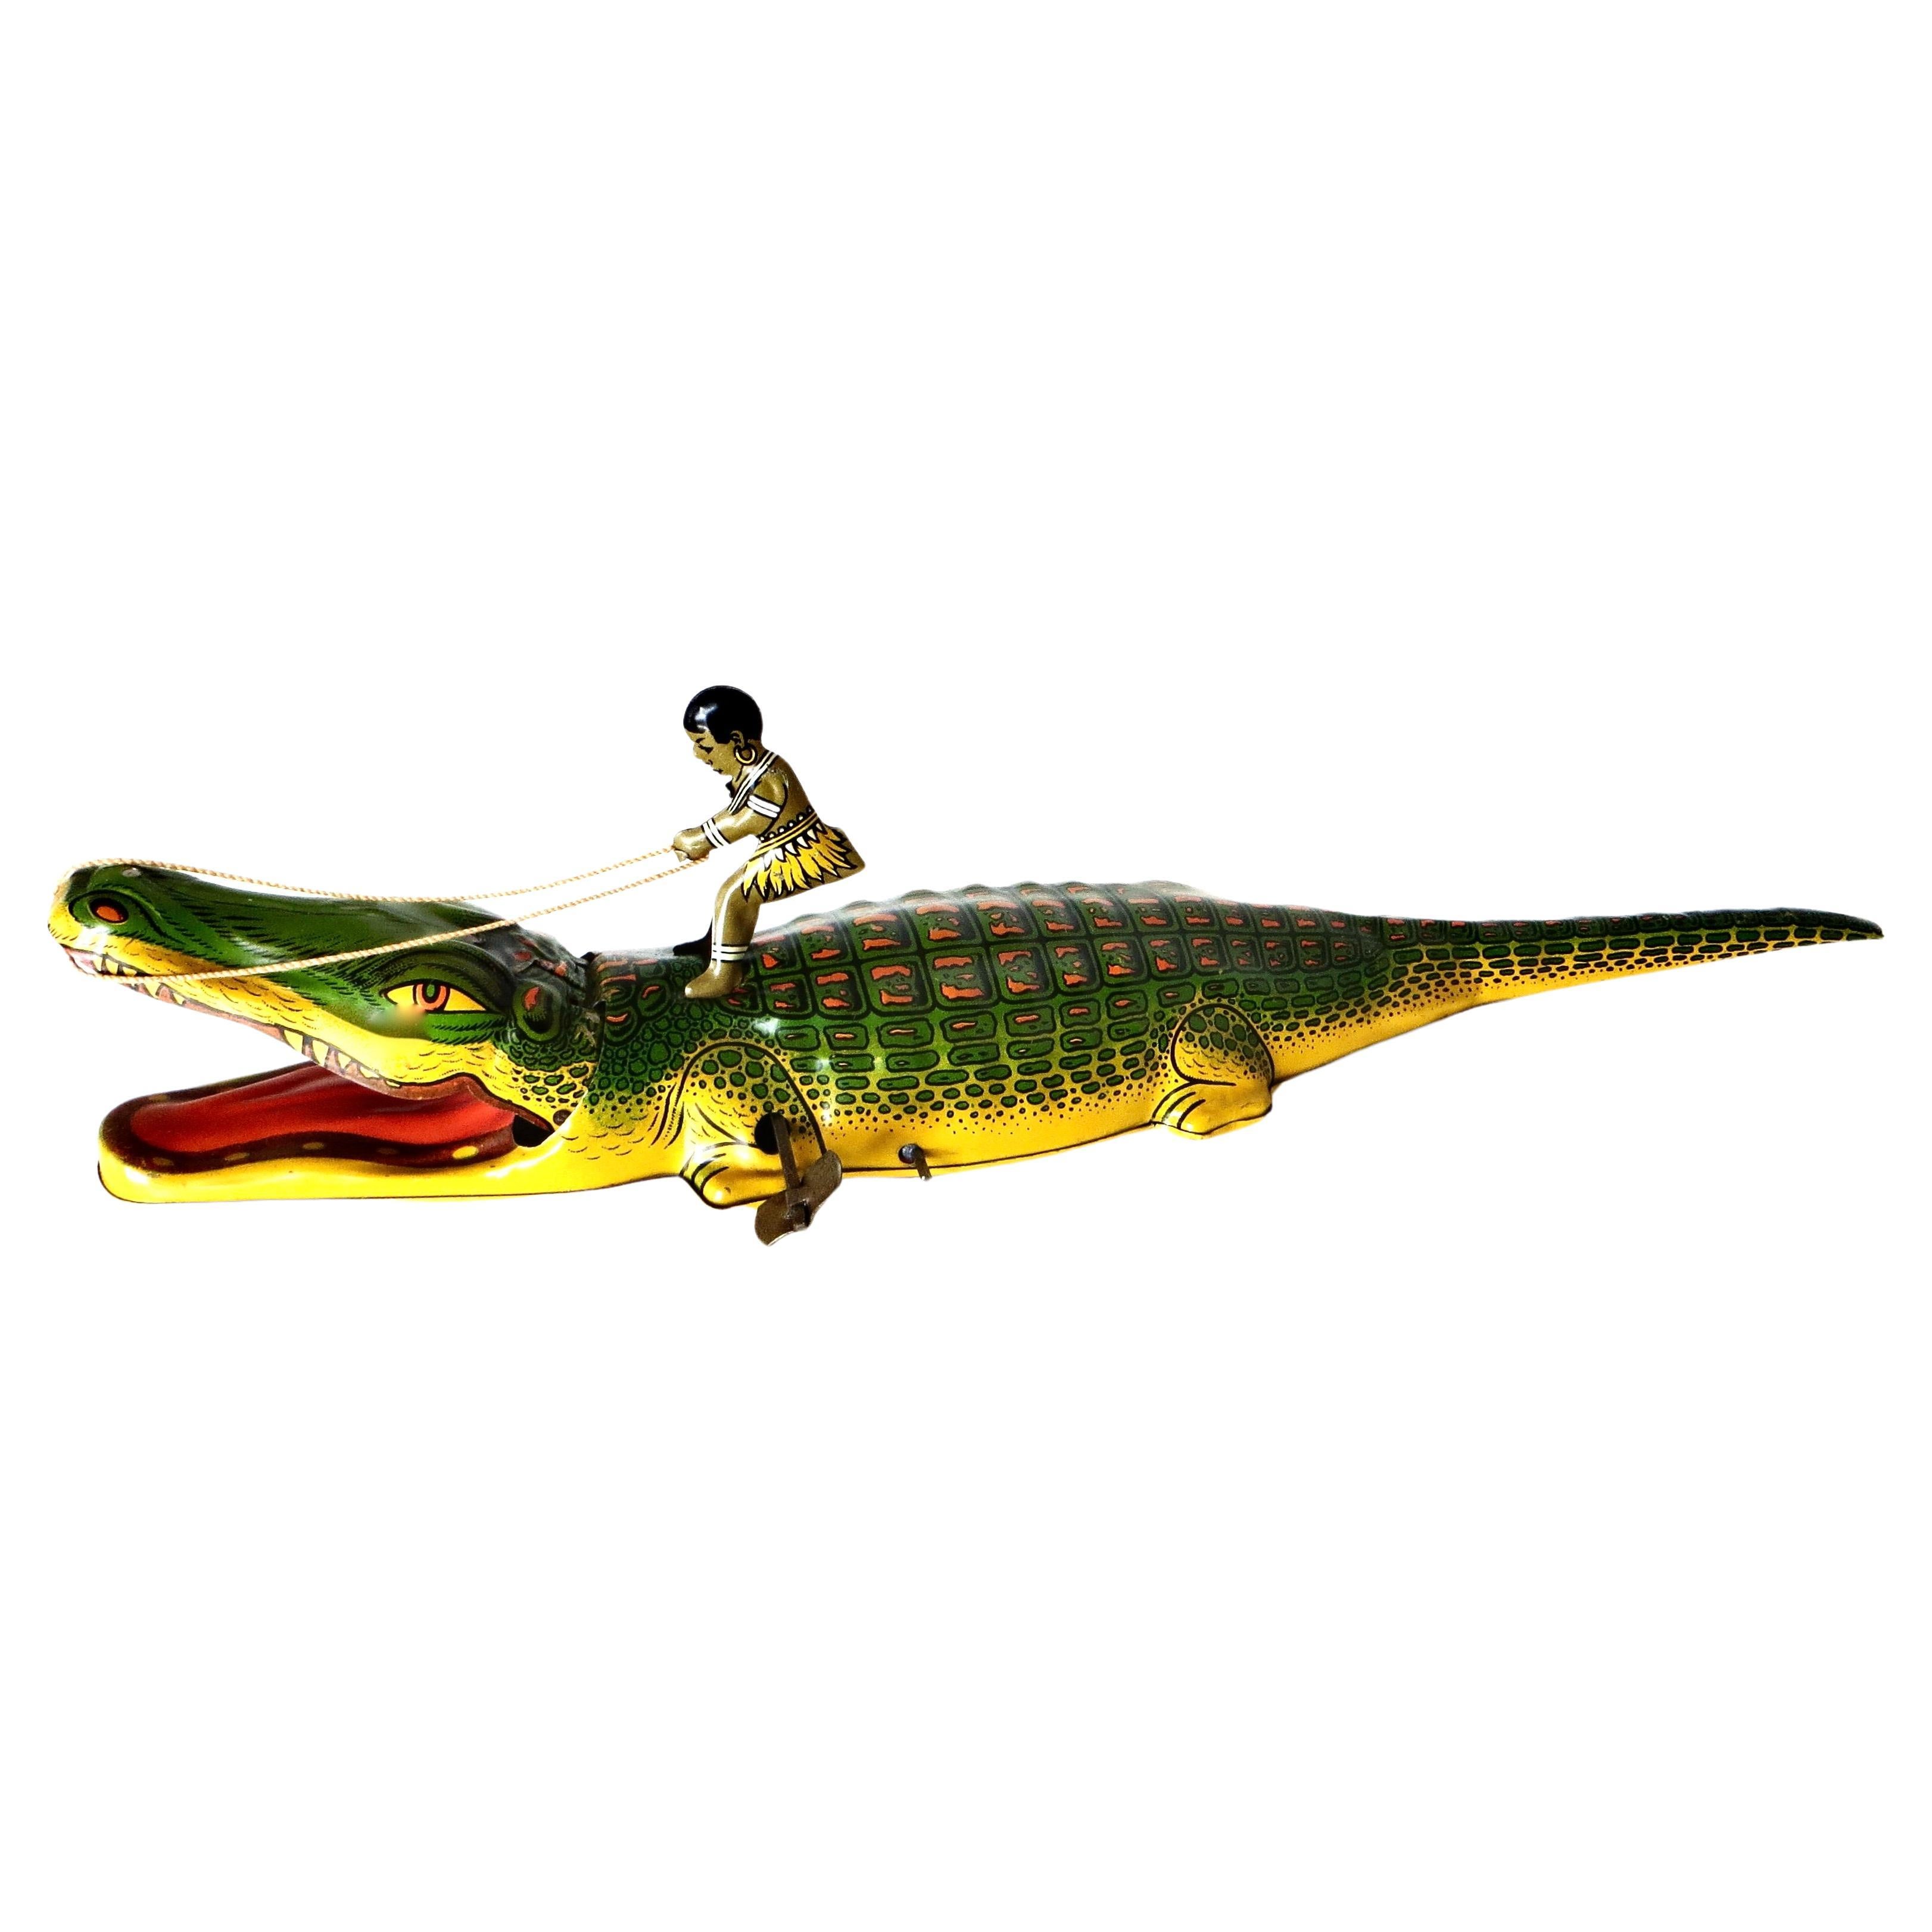 "Boy Riding An Alligator" Vintage Wind-Up Toy by J. Chein Co., N.J., Circa 1935 For Sale